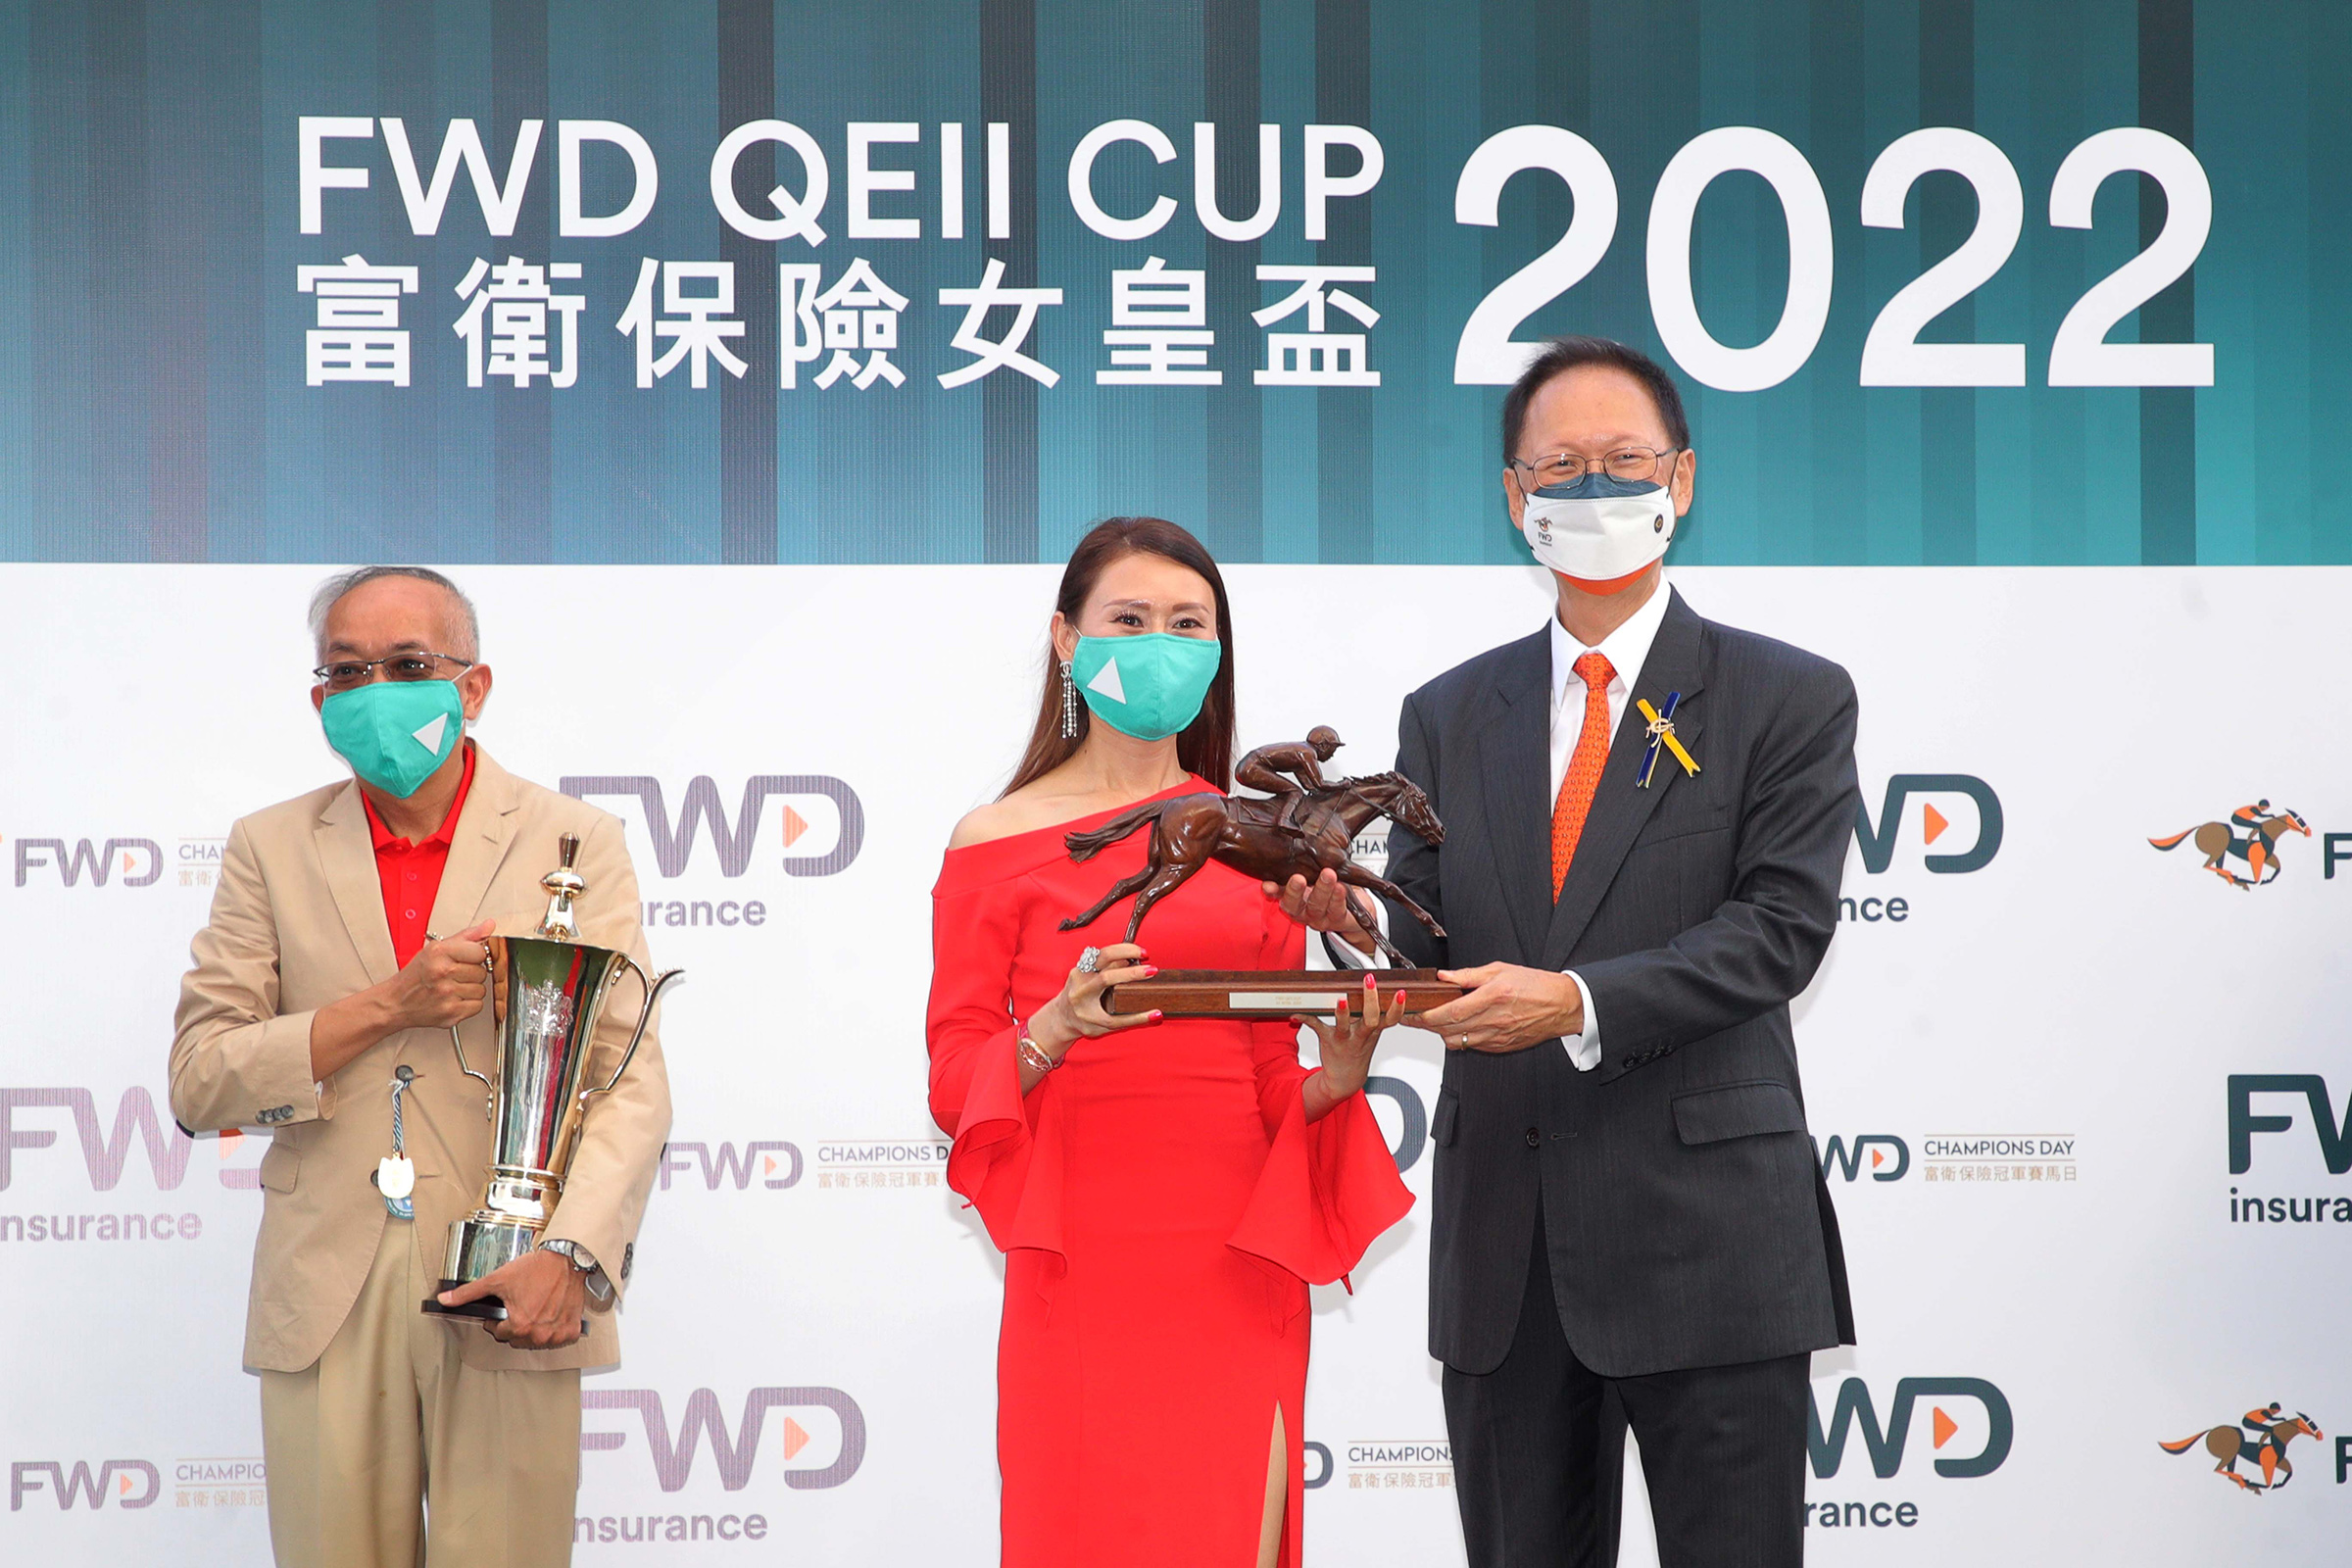 HKJC Chairman Philip Chen presents the trophy and bronze statuettes of a horse and jockey to Romantic Warrior’s owner Peter Lau Pak Fai and owner’s representative, trainer Danny Shum and jockey Karis Teetan.